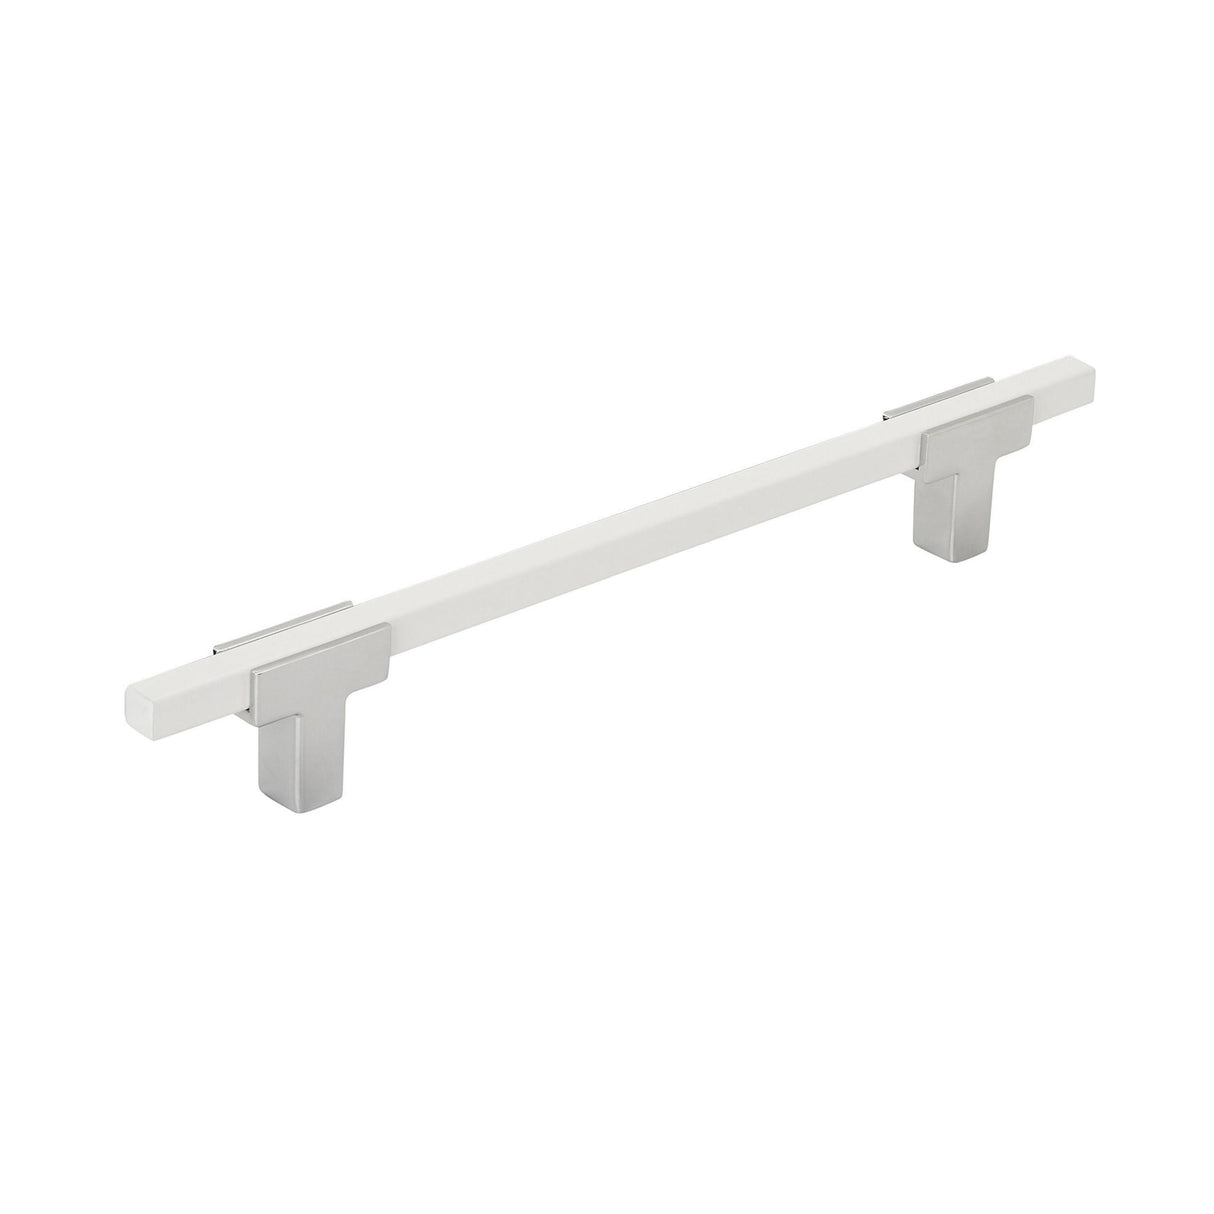 Amerock Cabinet Pull Polished Chrome/White 6-5/16 inch (160 mm) Center to Center Urbanite 1 Pack Drawer Pull Drawer Handle Cabinet Hardware